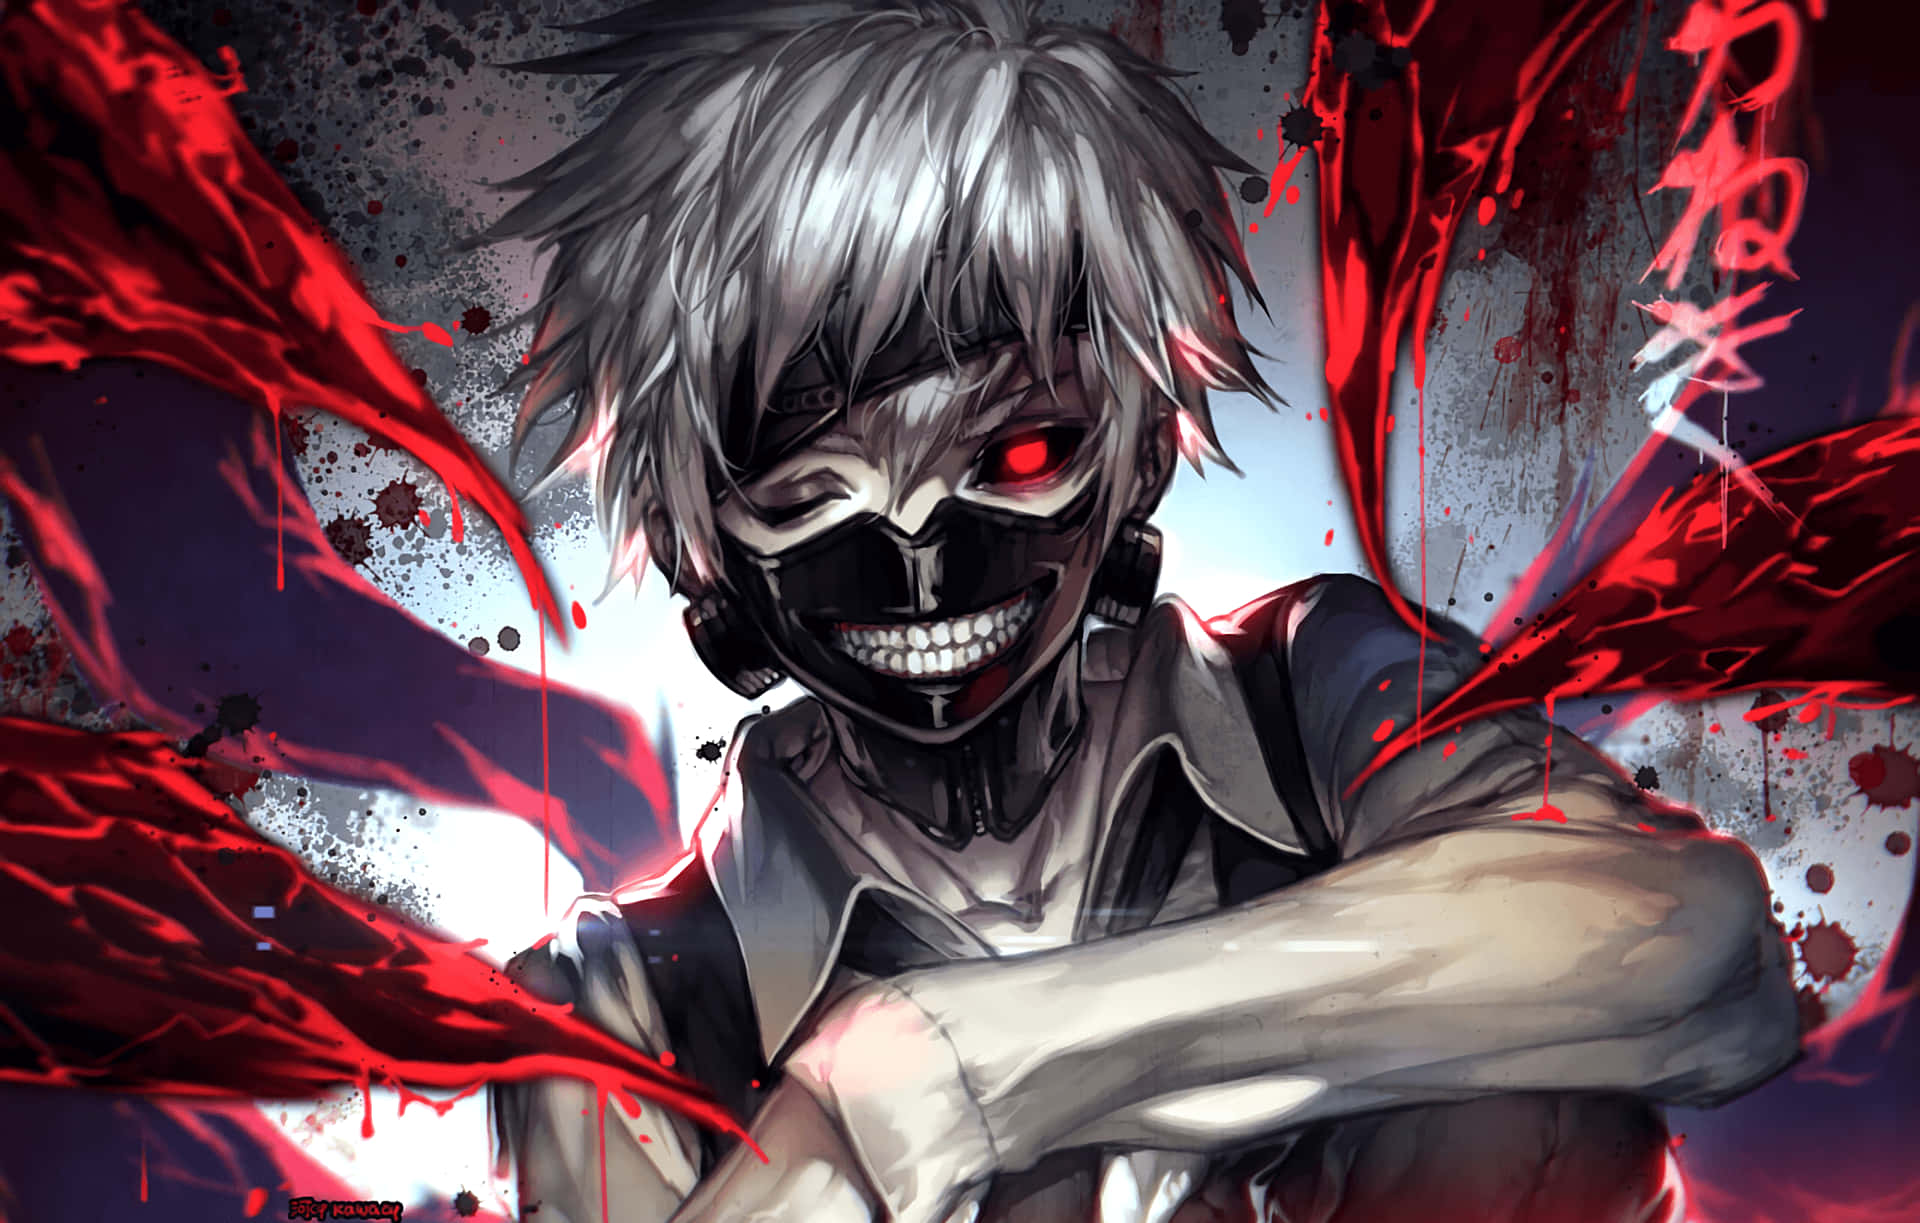 Download A mysterious and intimidating Scary Anime Boy stares ominously  Wallpaper  Wallpaperscom